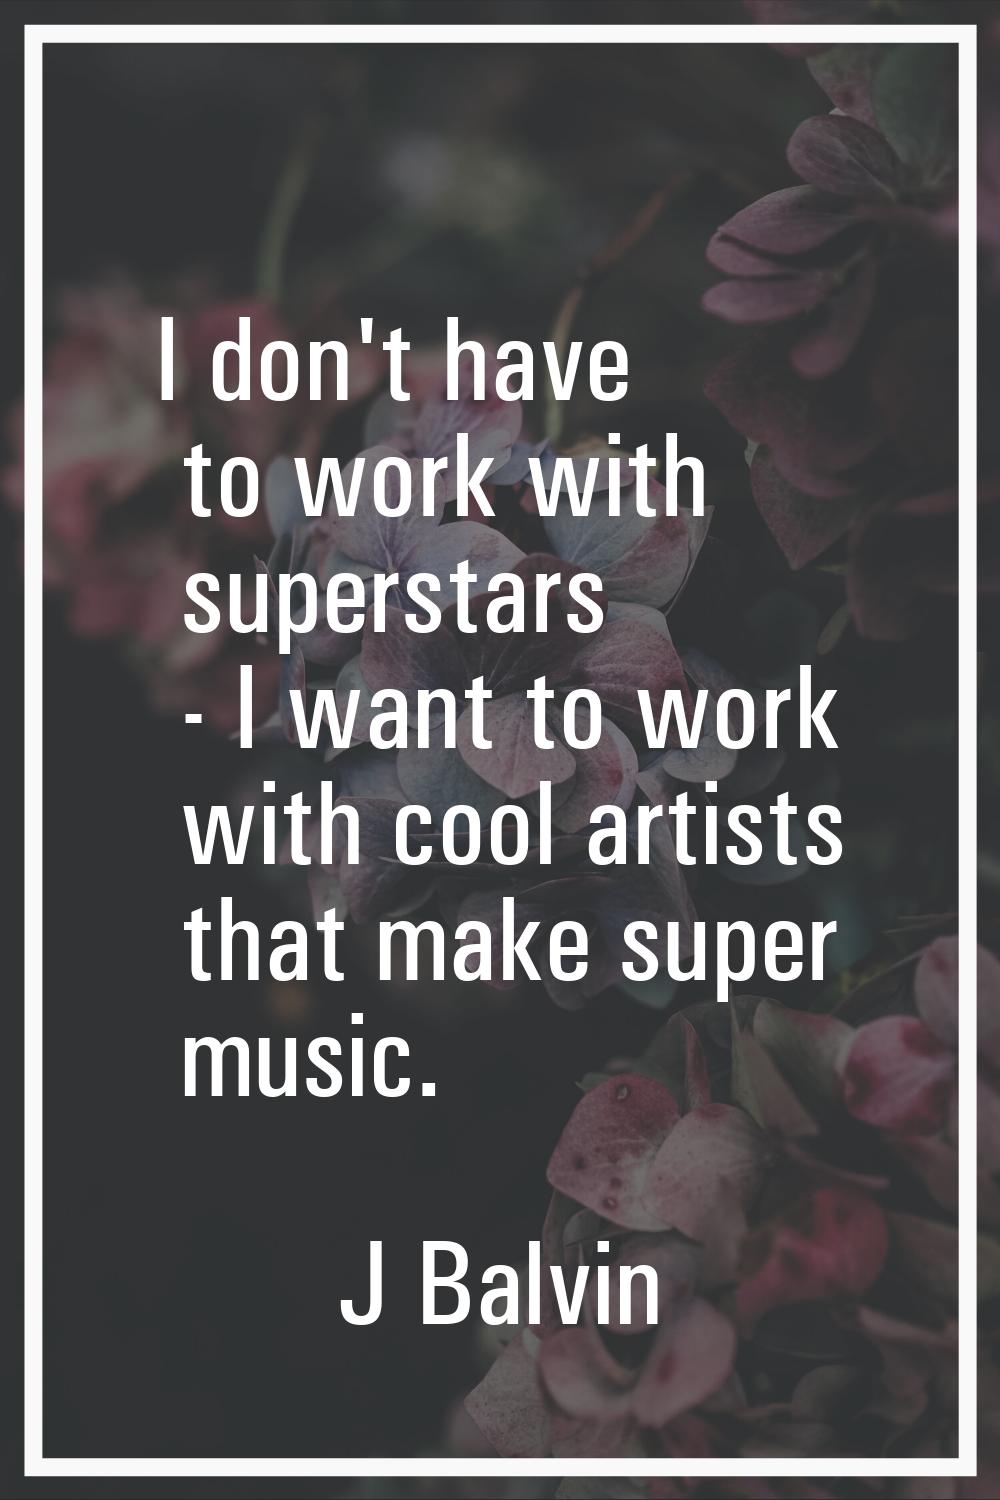 I don't have to work with superstars - I want to work with cool artists that make super music.